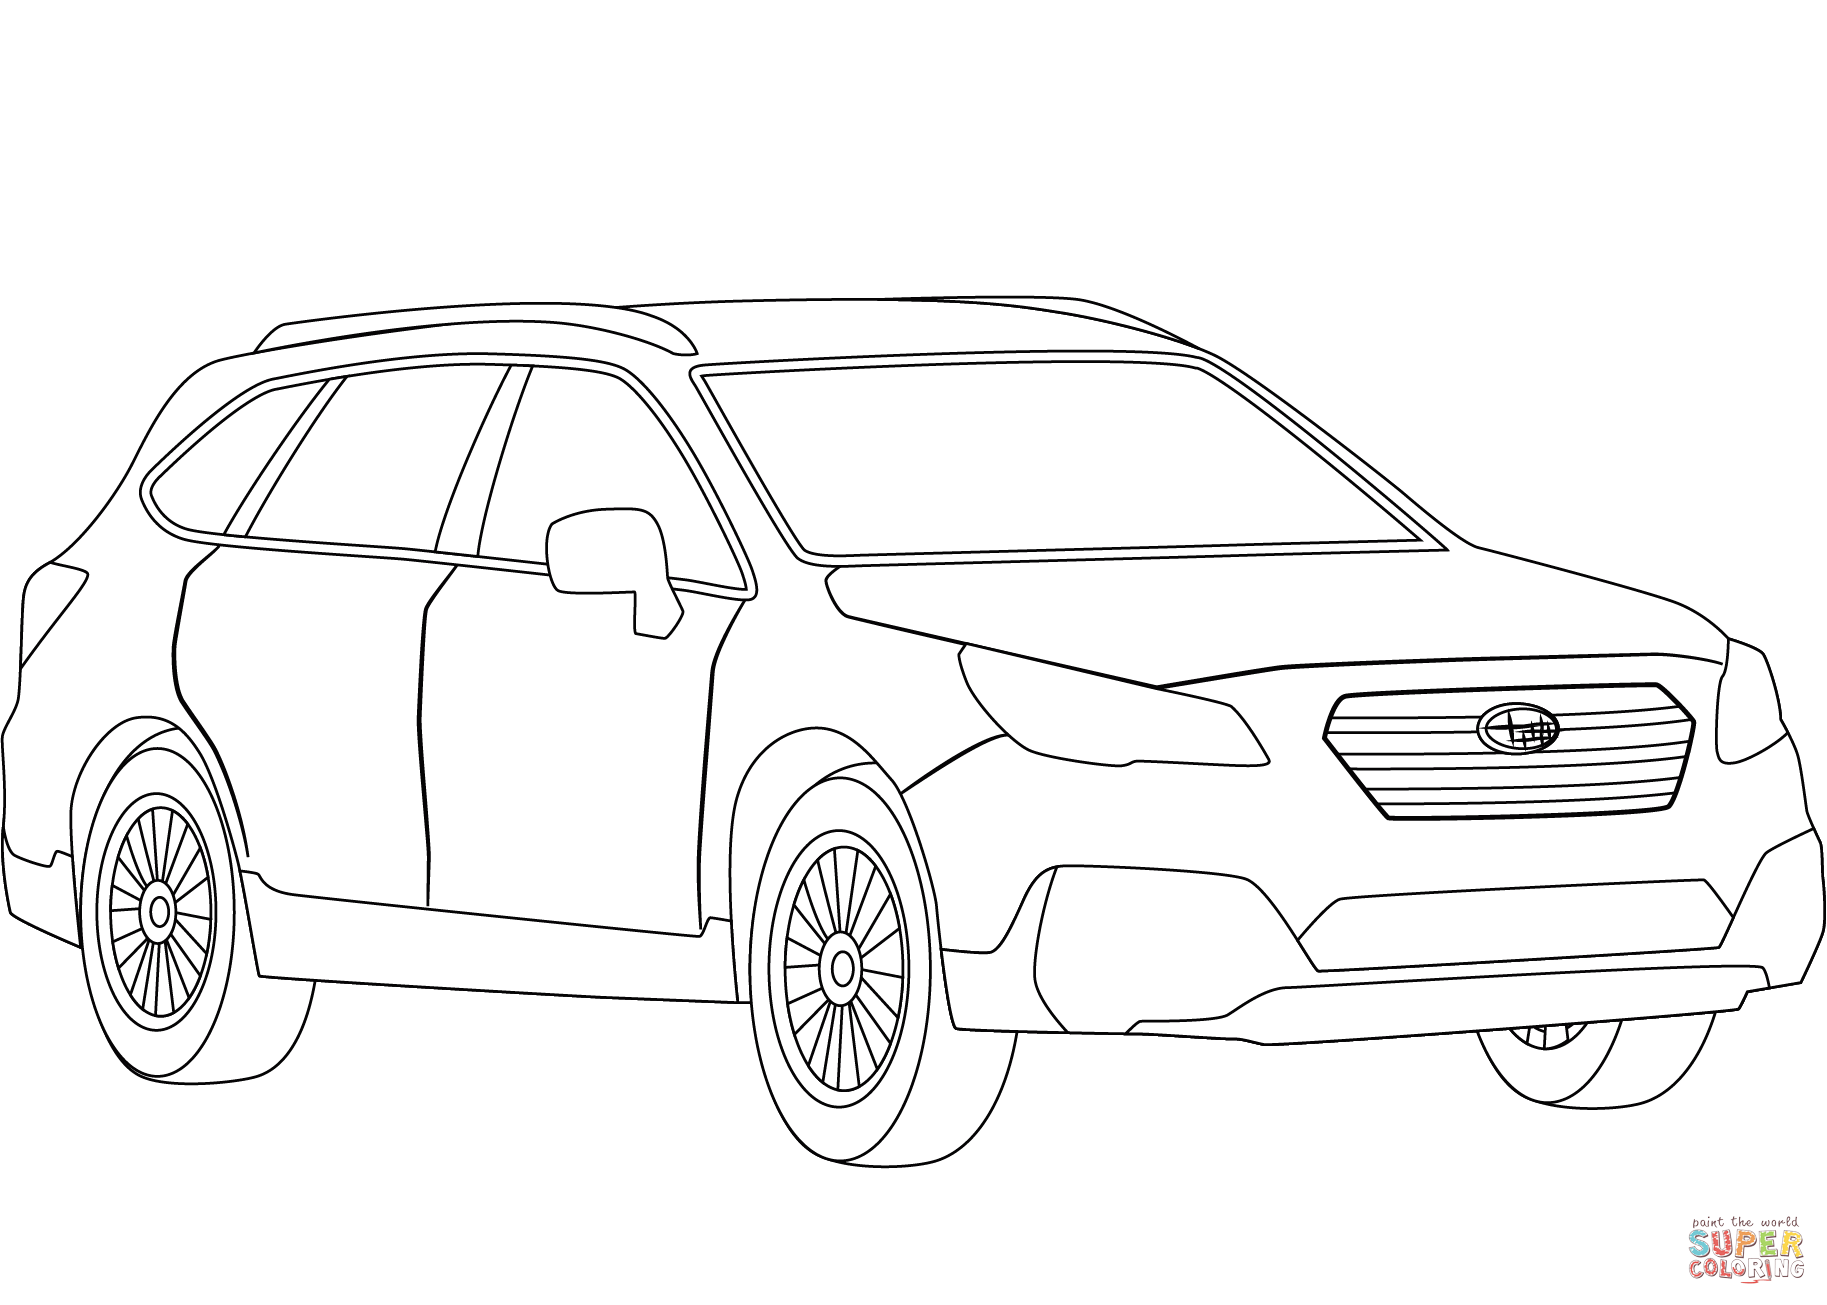 Subaru Outback coloring page | Free Printable Coloring Pages